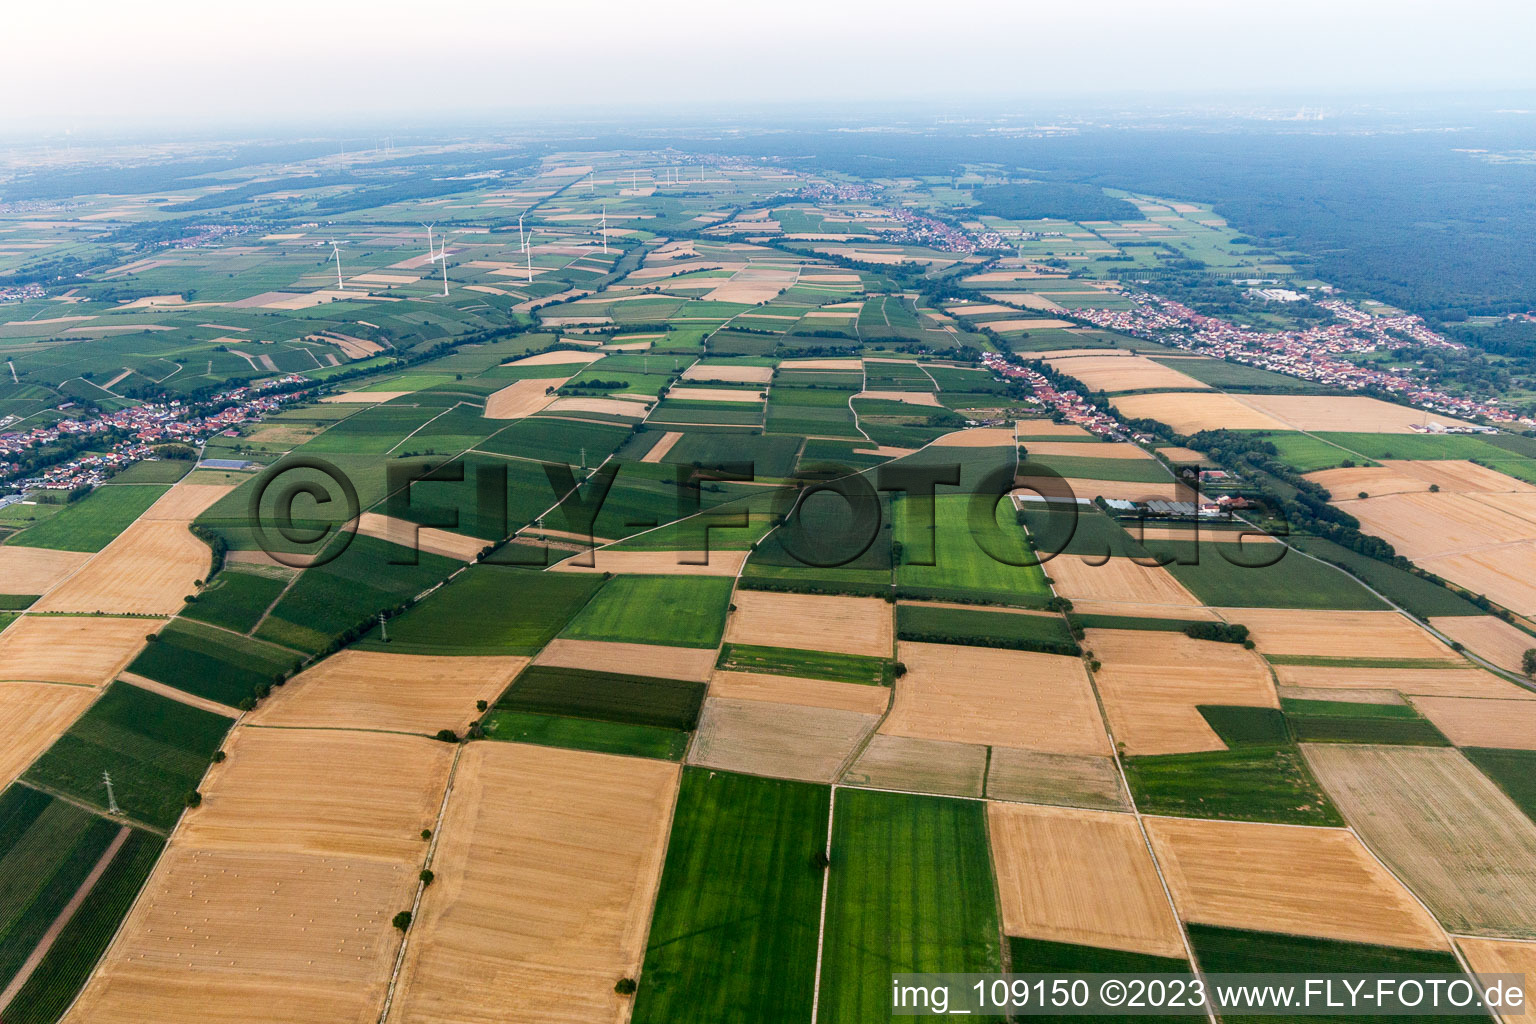 Niederotterbach in the state Rhineland-Palatinate, Germany seen from above